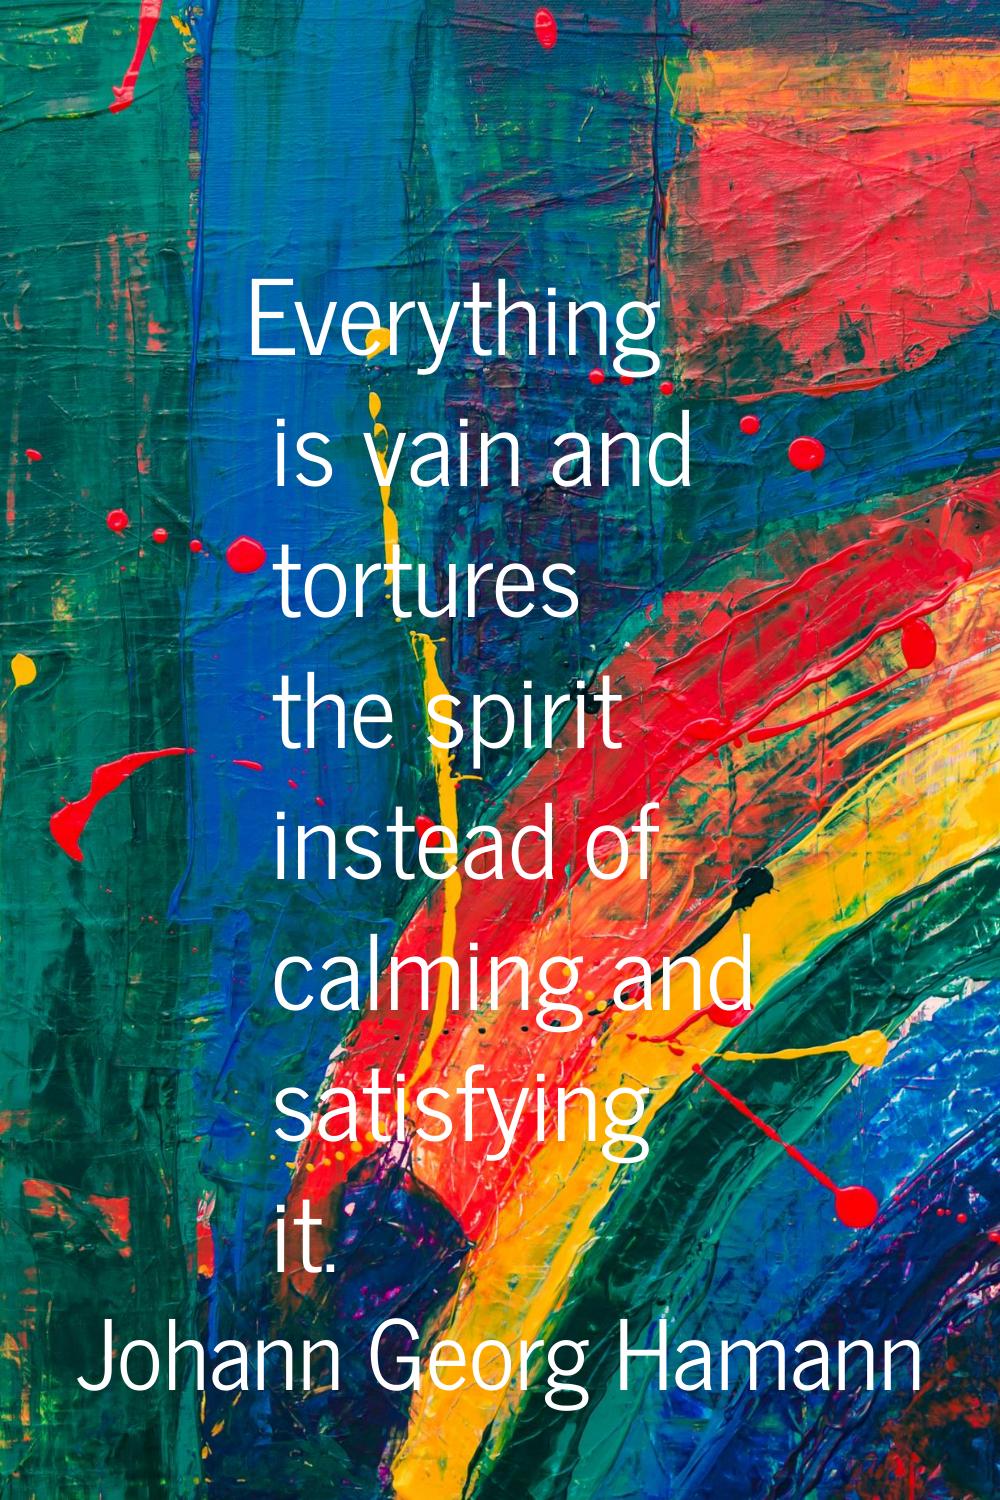 Everything is vain and tortures the spirit instead of calming and satisfying it.